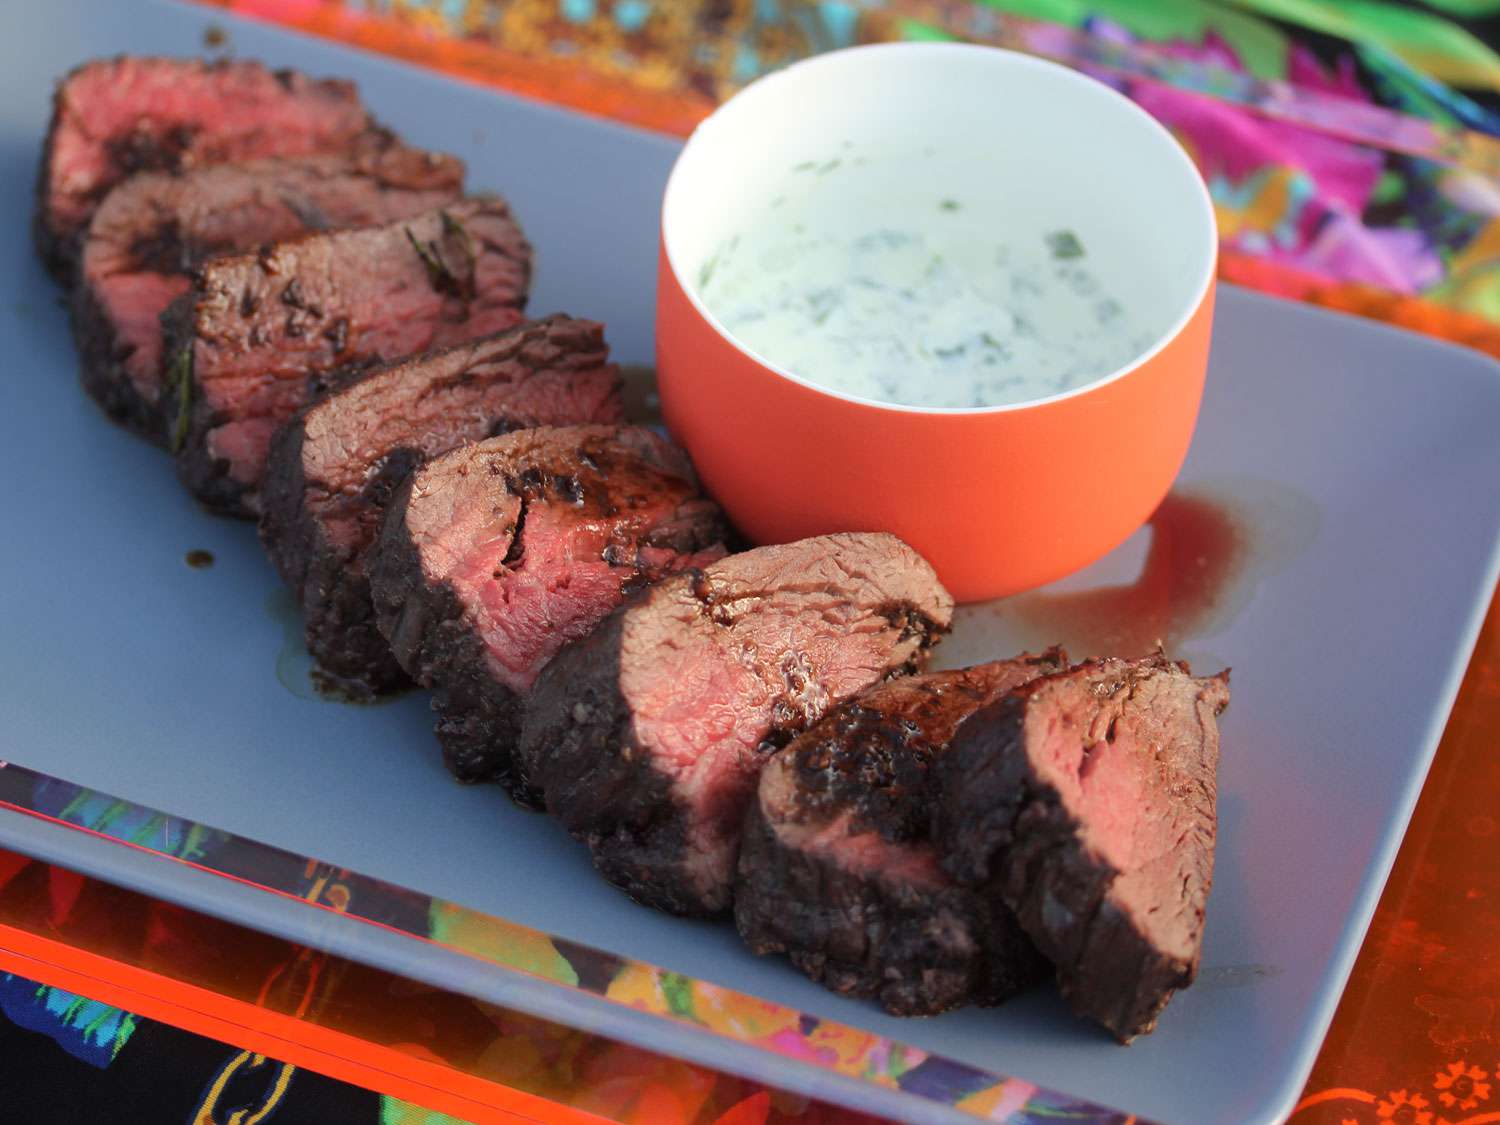 A platter of red-wine marinated roasted beef tenderloin with horseradish sauce.